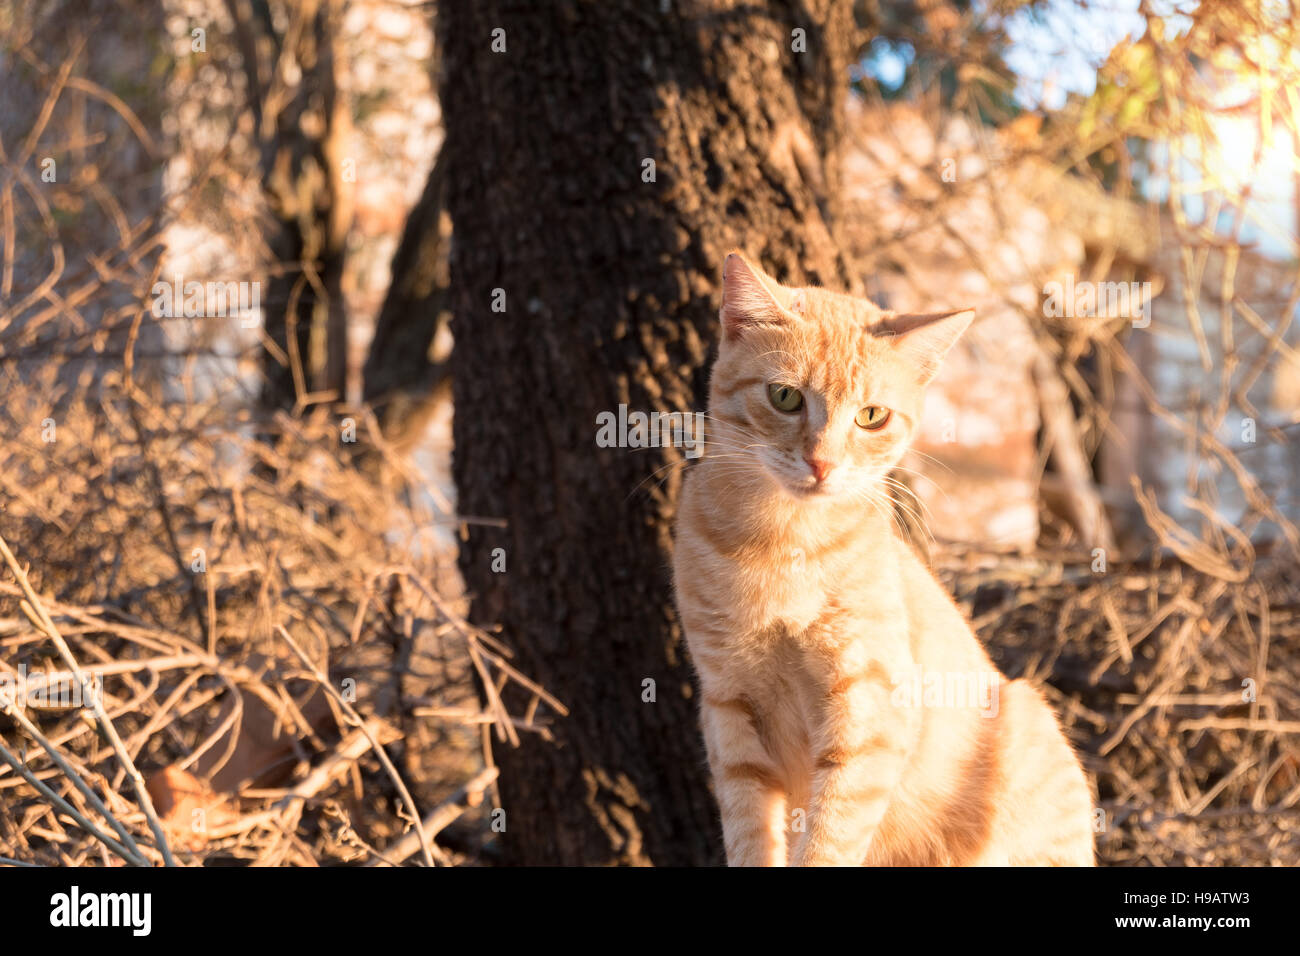 Brown cat of a village on rural area in Turkey Stock Photo